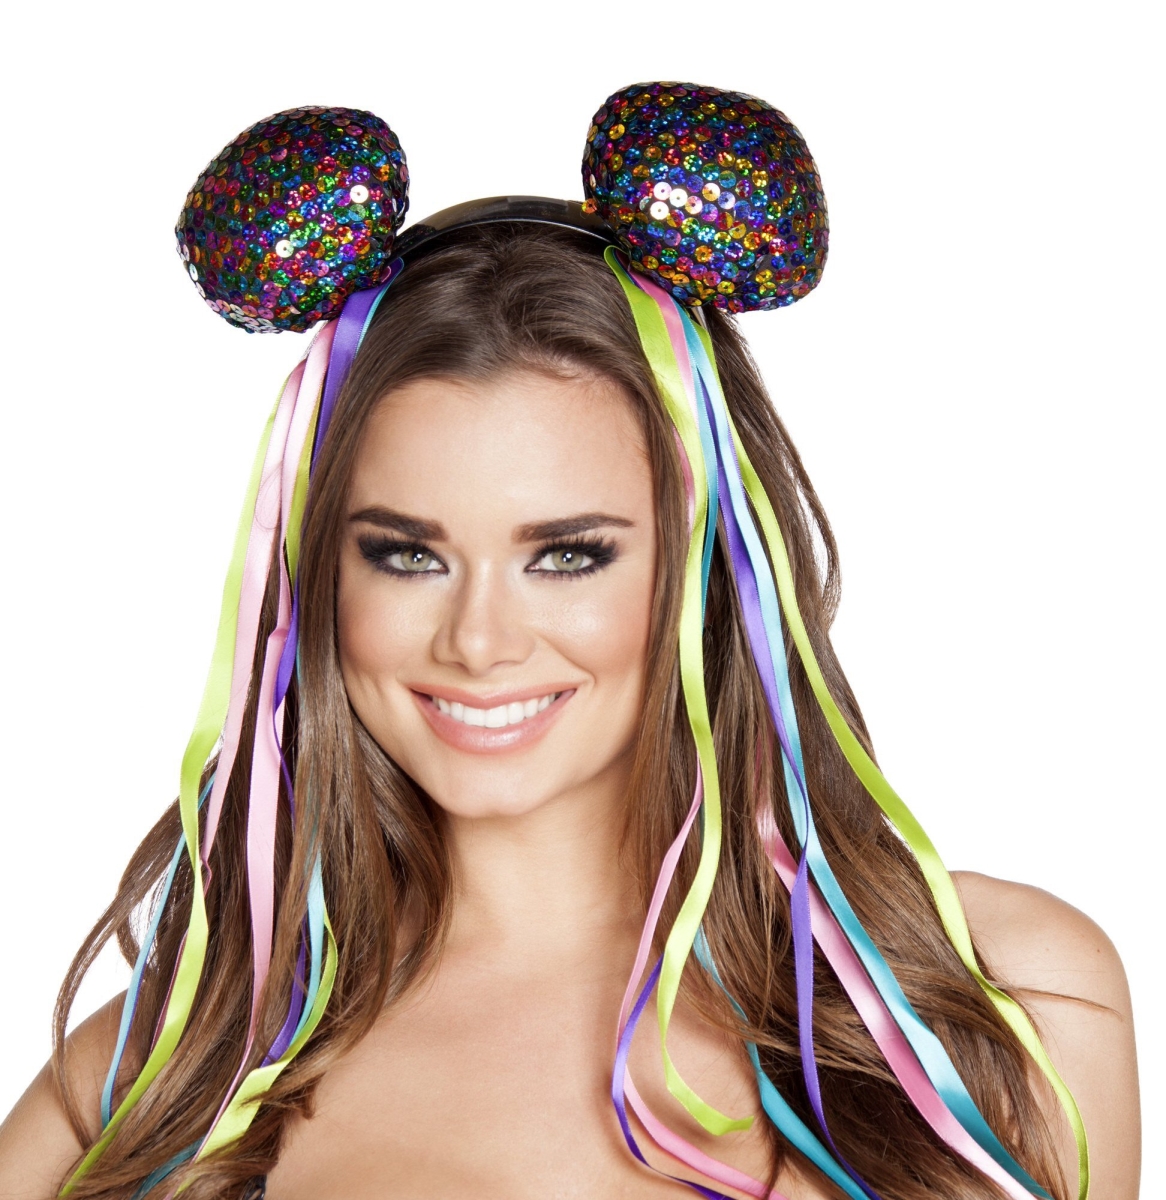 Picture of Roma Costume 4558-AS-O-S Multi Sequin Head Piece for Women - One Size